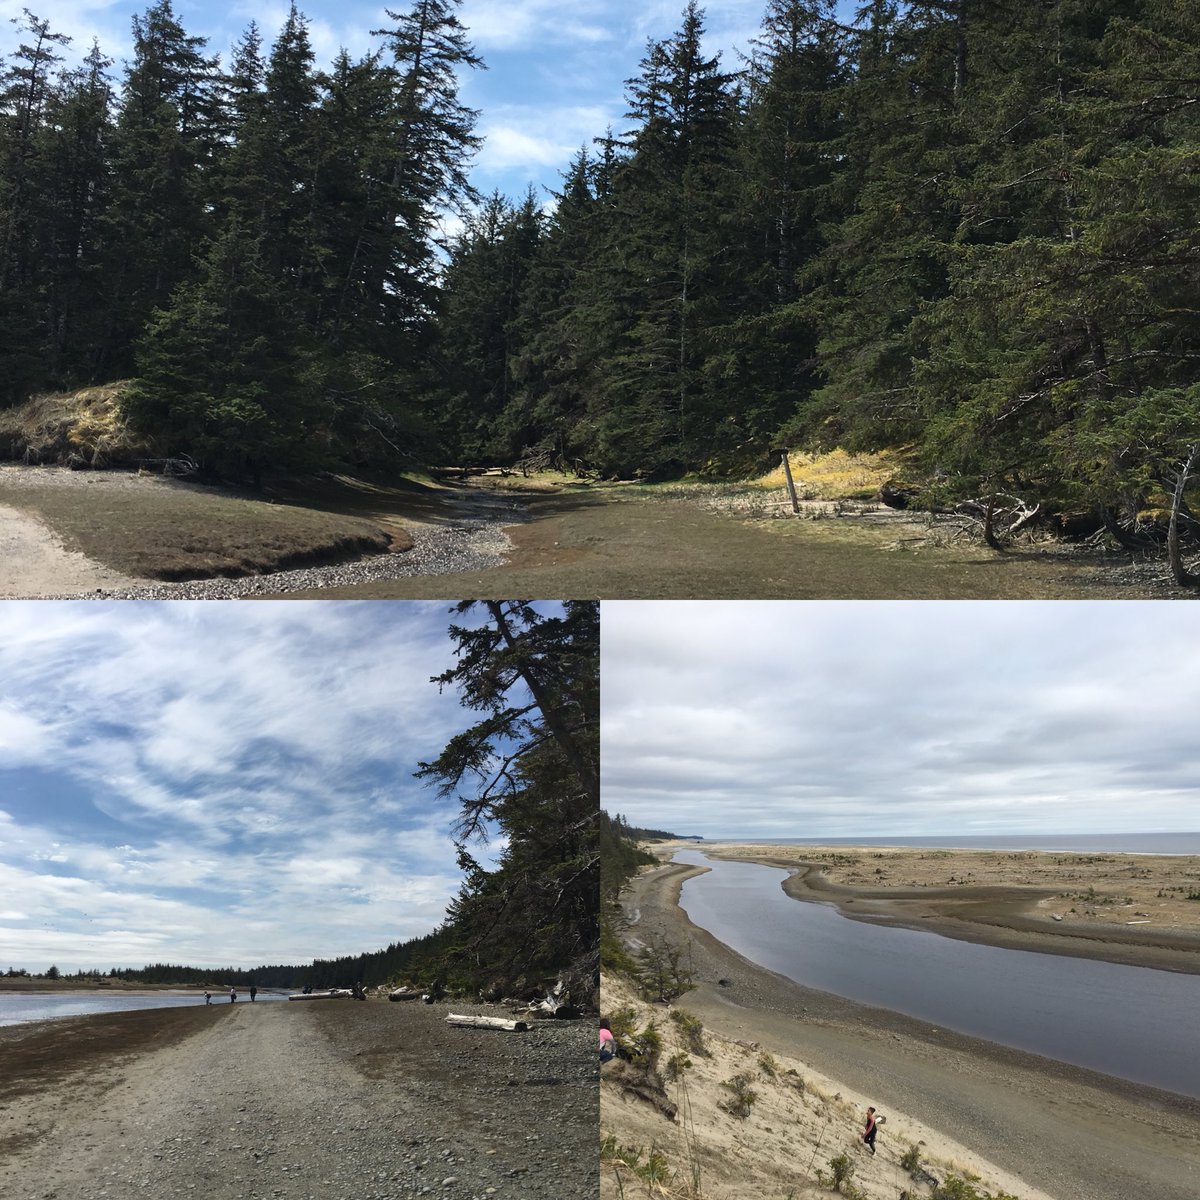 Exploring the #Tlell river today with the grade 6/7 class #landbasededucation #outdooreducation #bced #getoutthere #haidagwaii